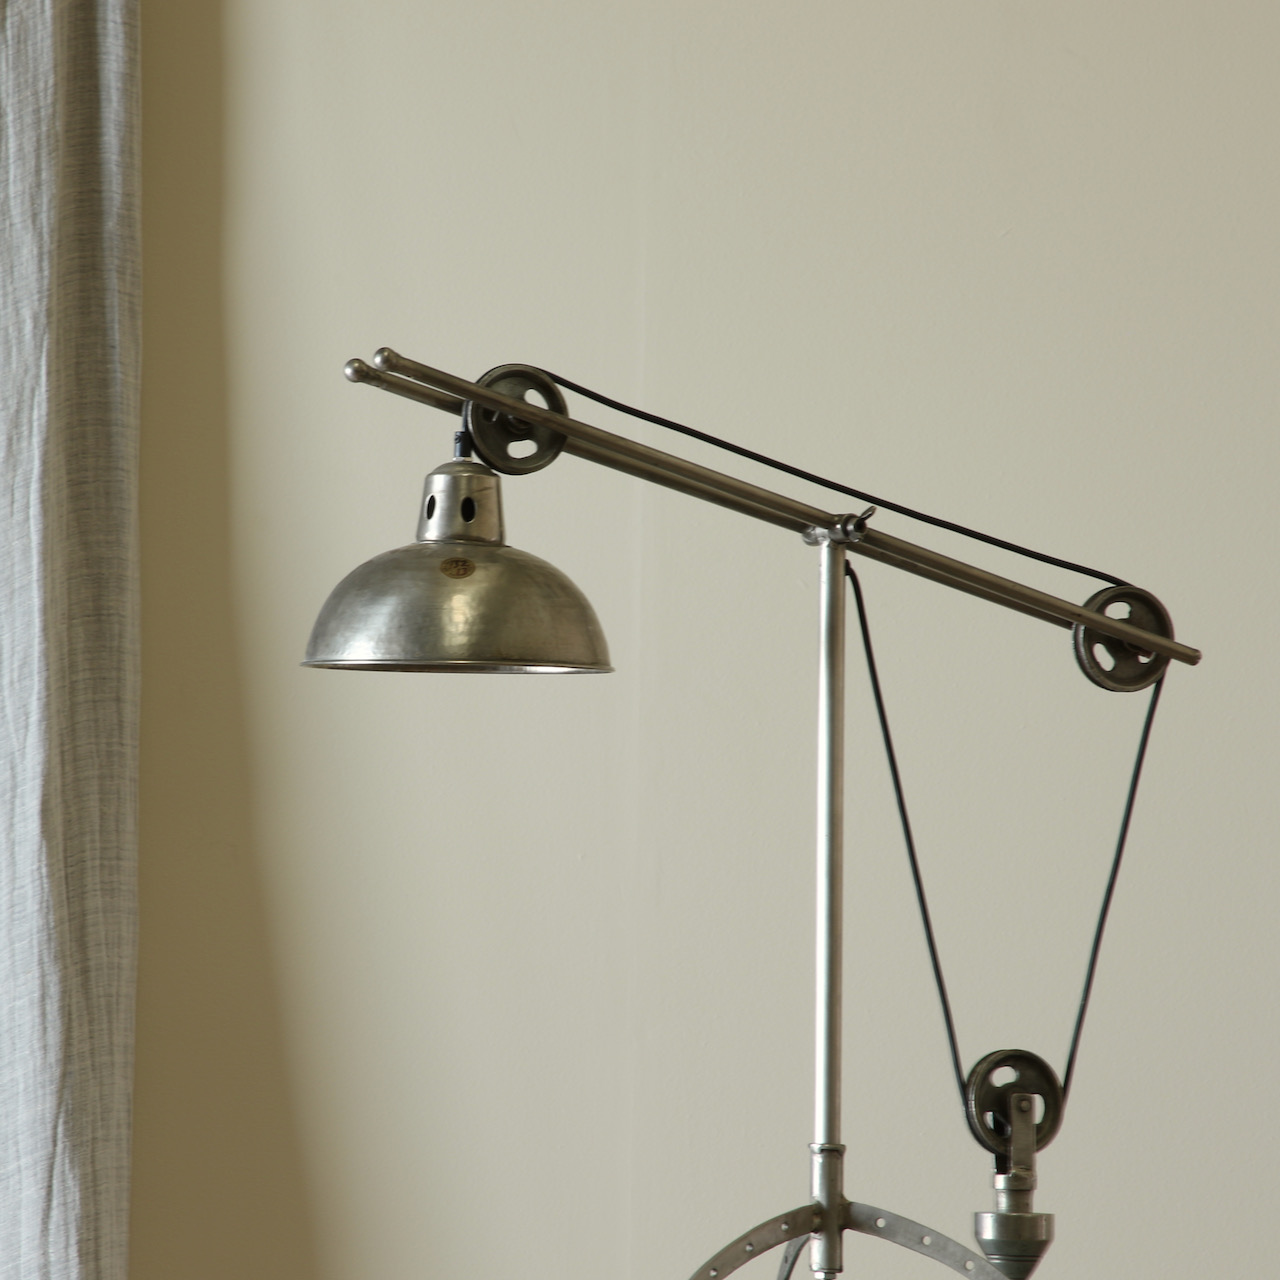 Articulated Lamp